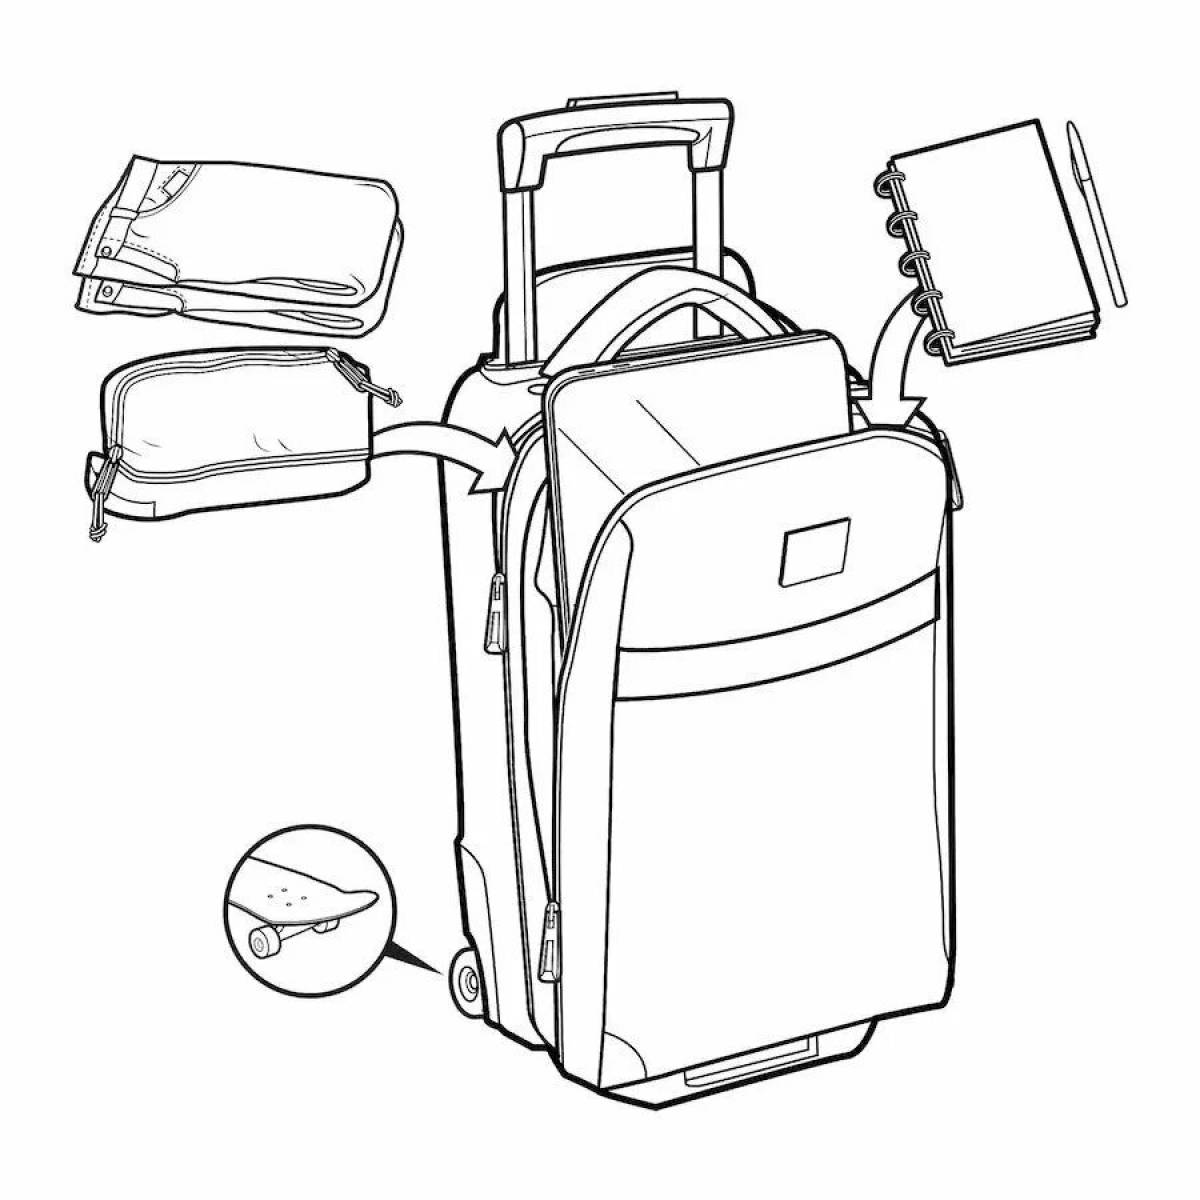 Witty coloring of a suitcase for babies